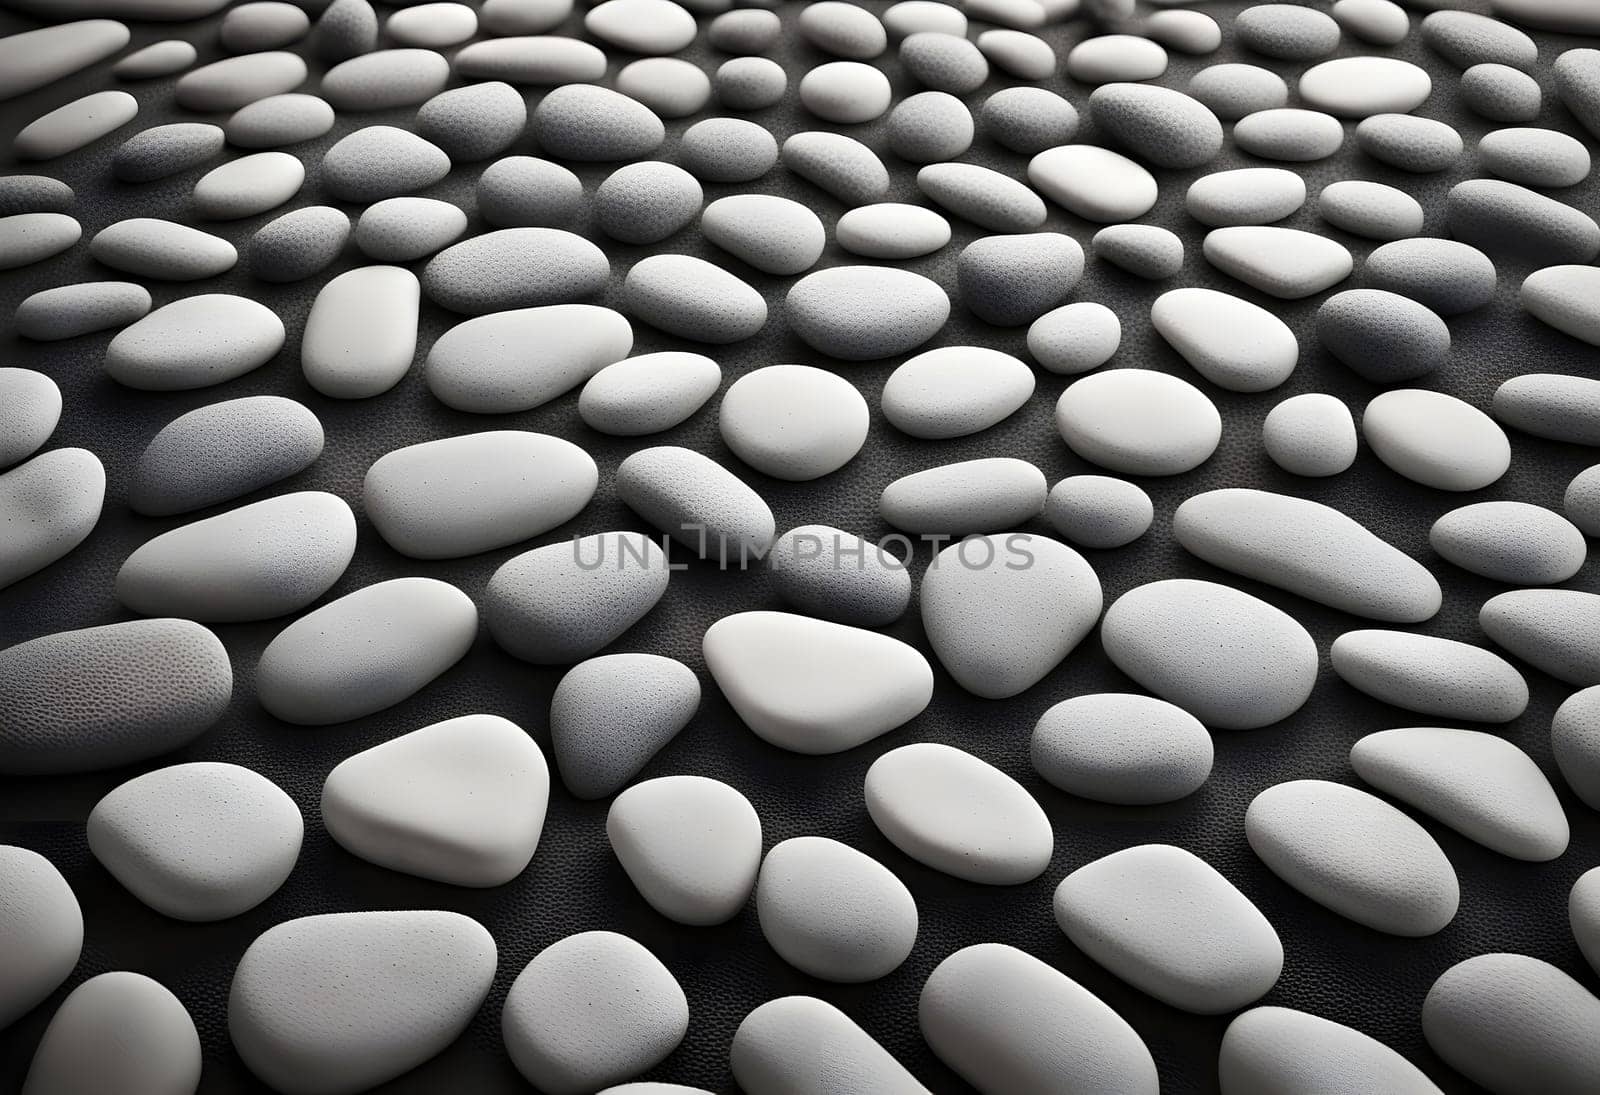 The painting shows many white stones on a black surface. Rocks come in a variety of sizes and shapes, from small pebbles to large boulders. by rostik924